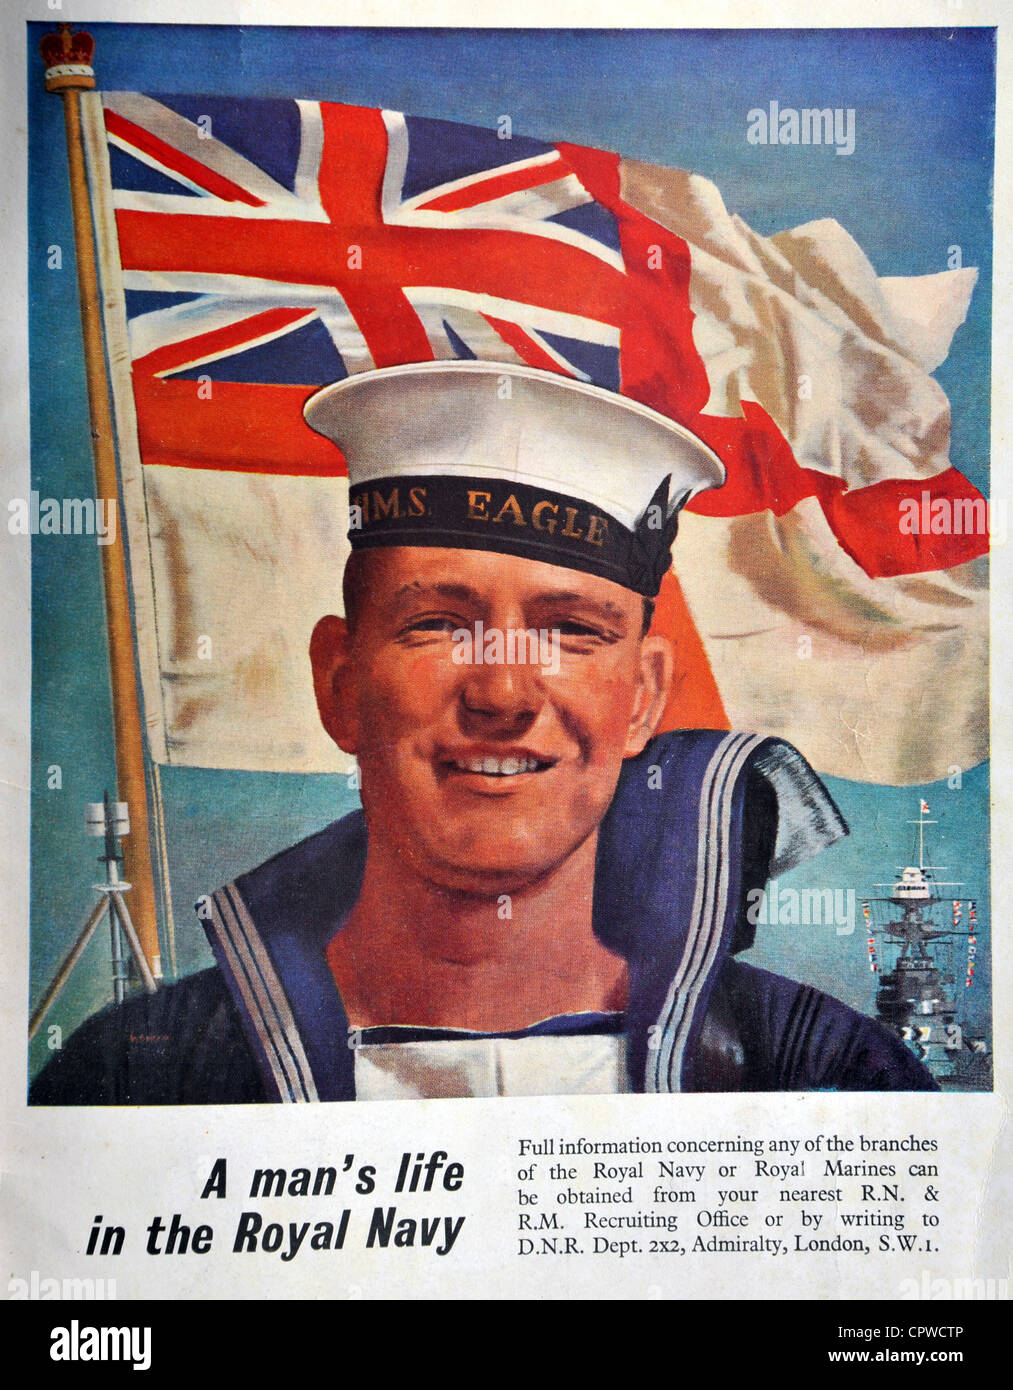 Royal Navy recruitment advert from 1953. Britain. Stock Photo